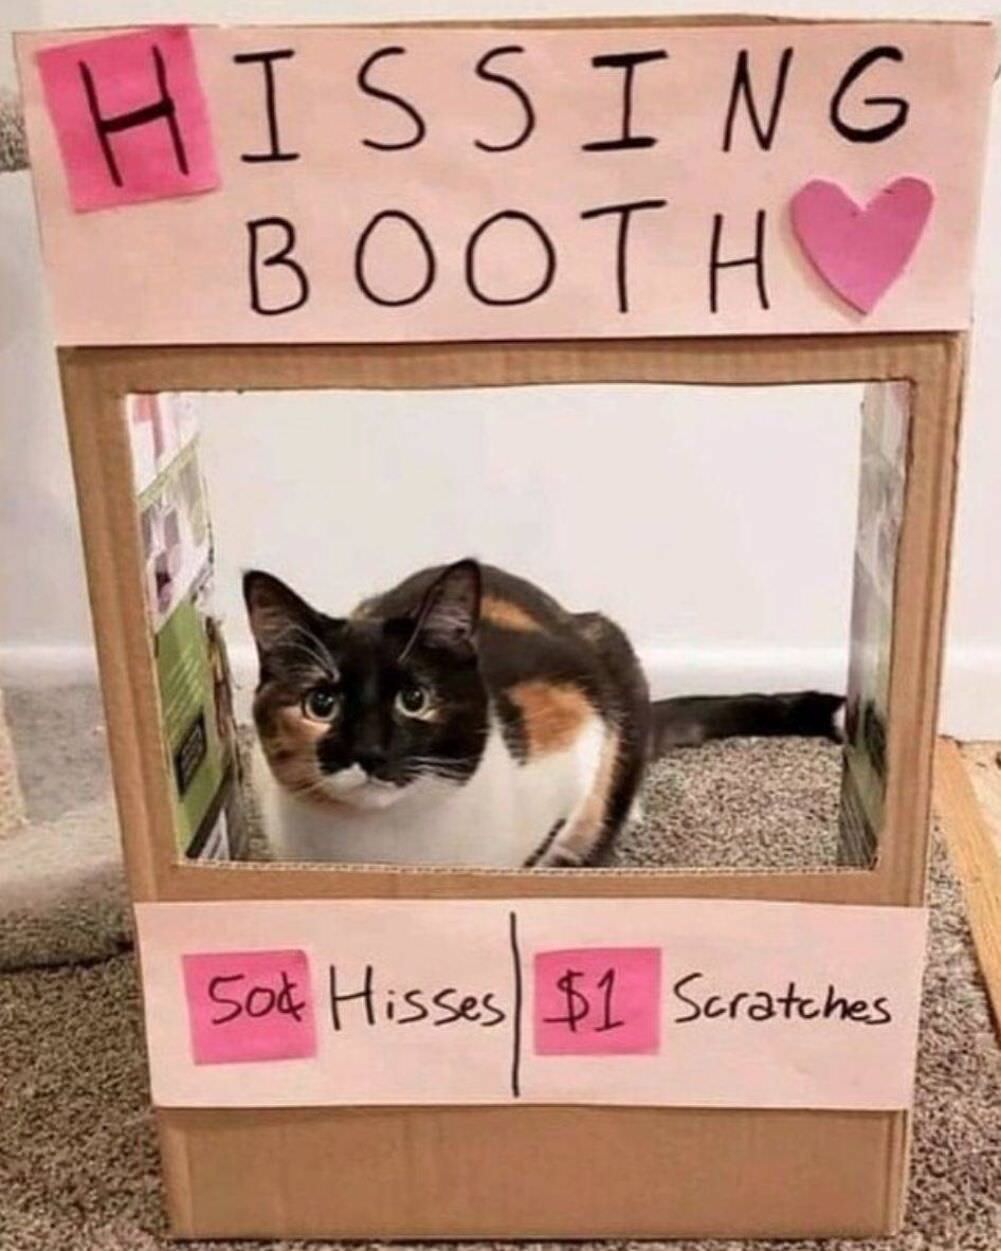 the hissing booth